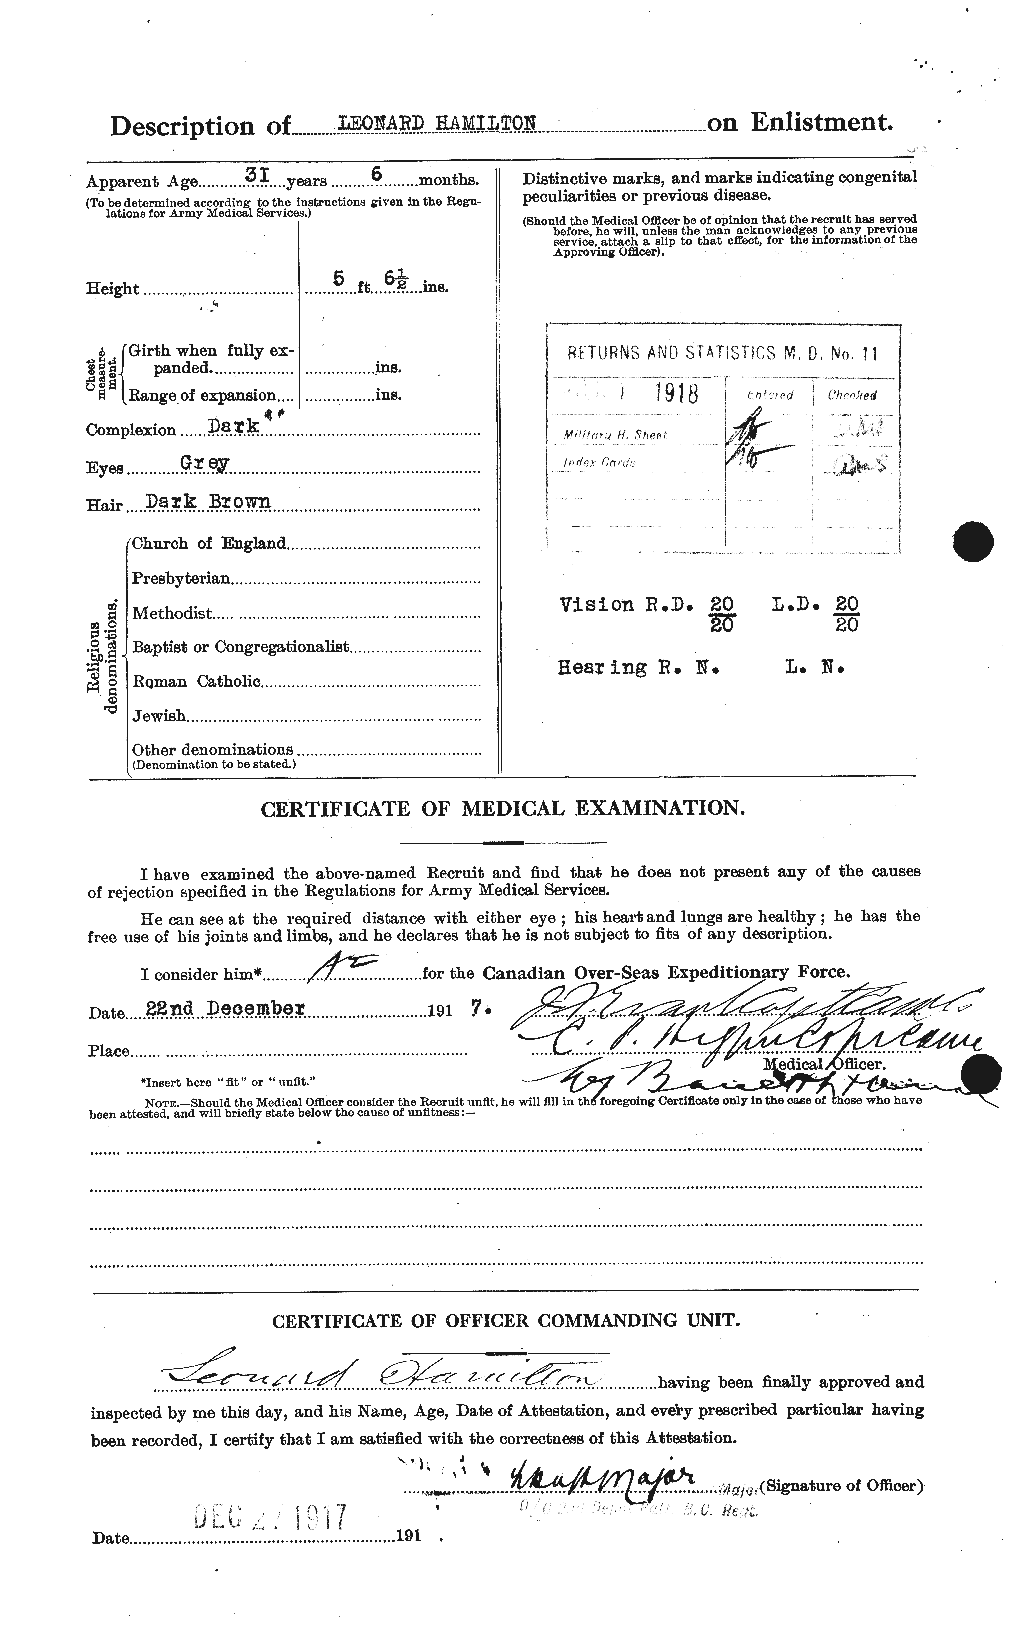 Personnel Records of the First World War - CEF 373162b